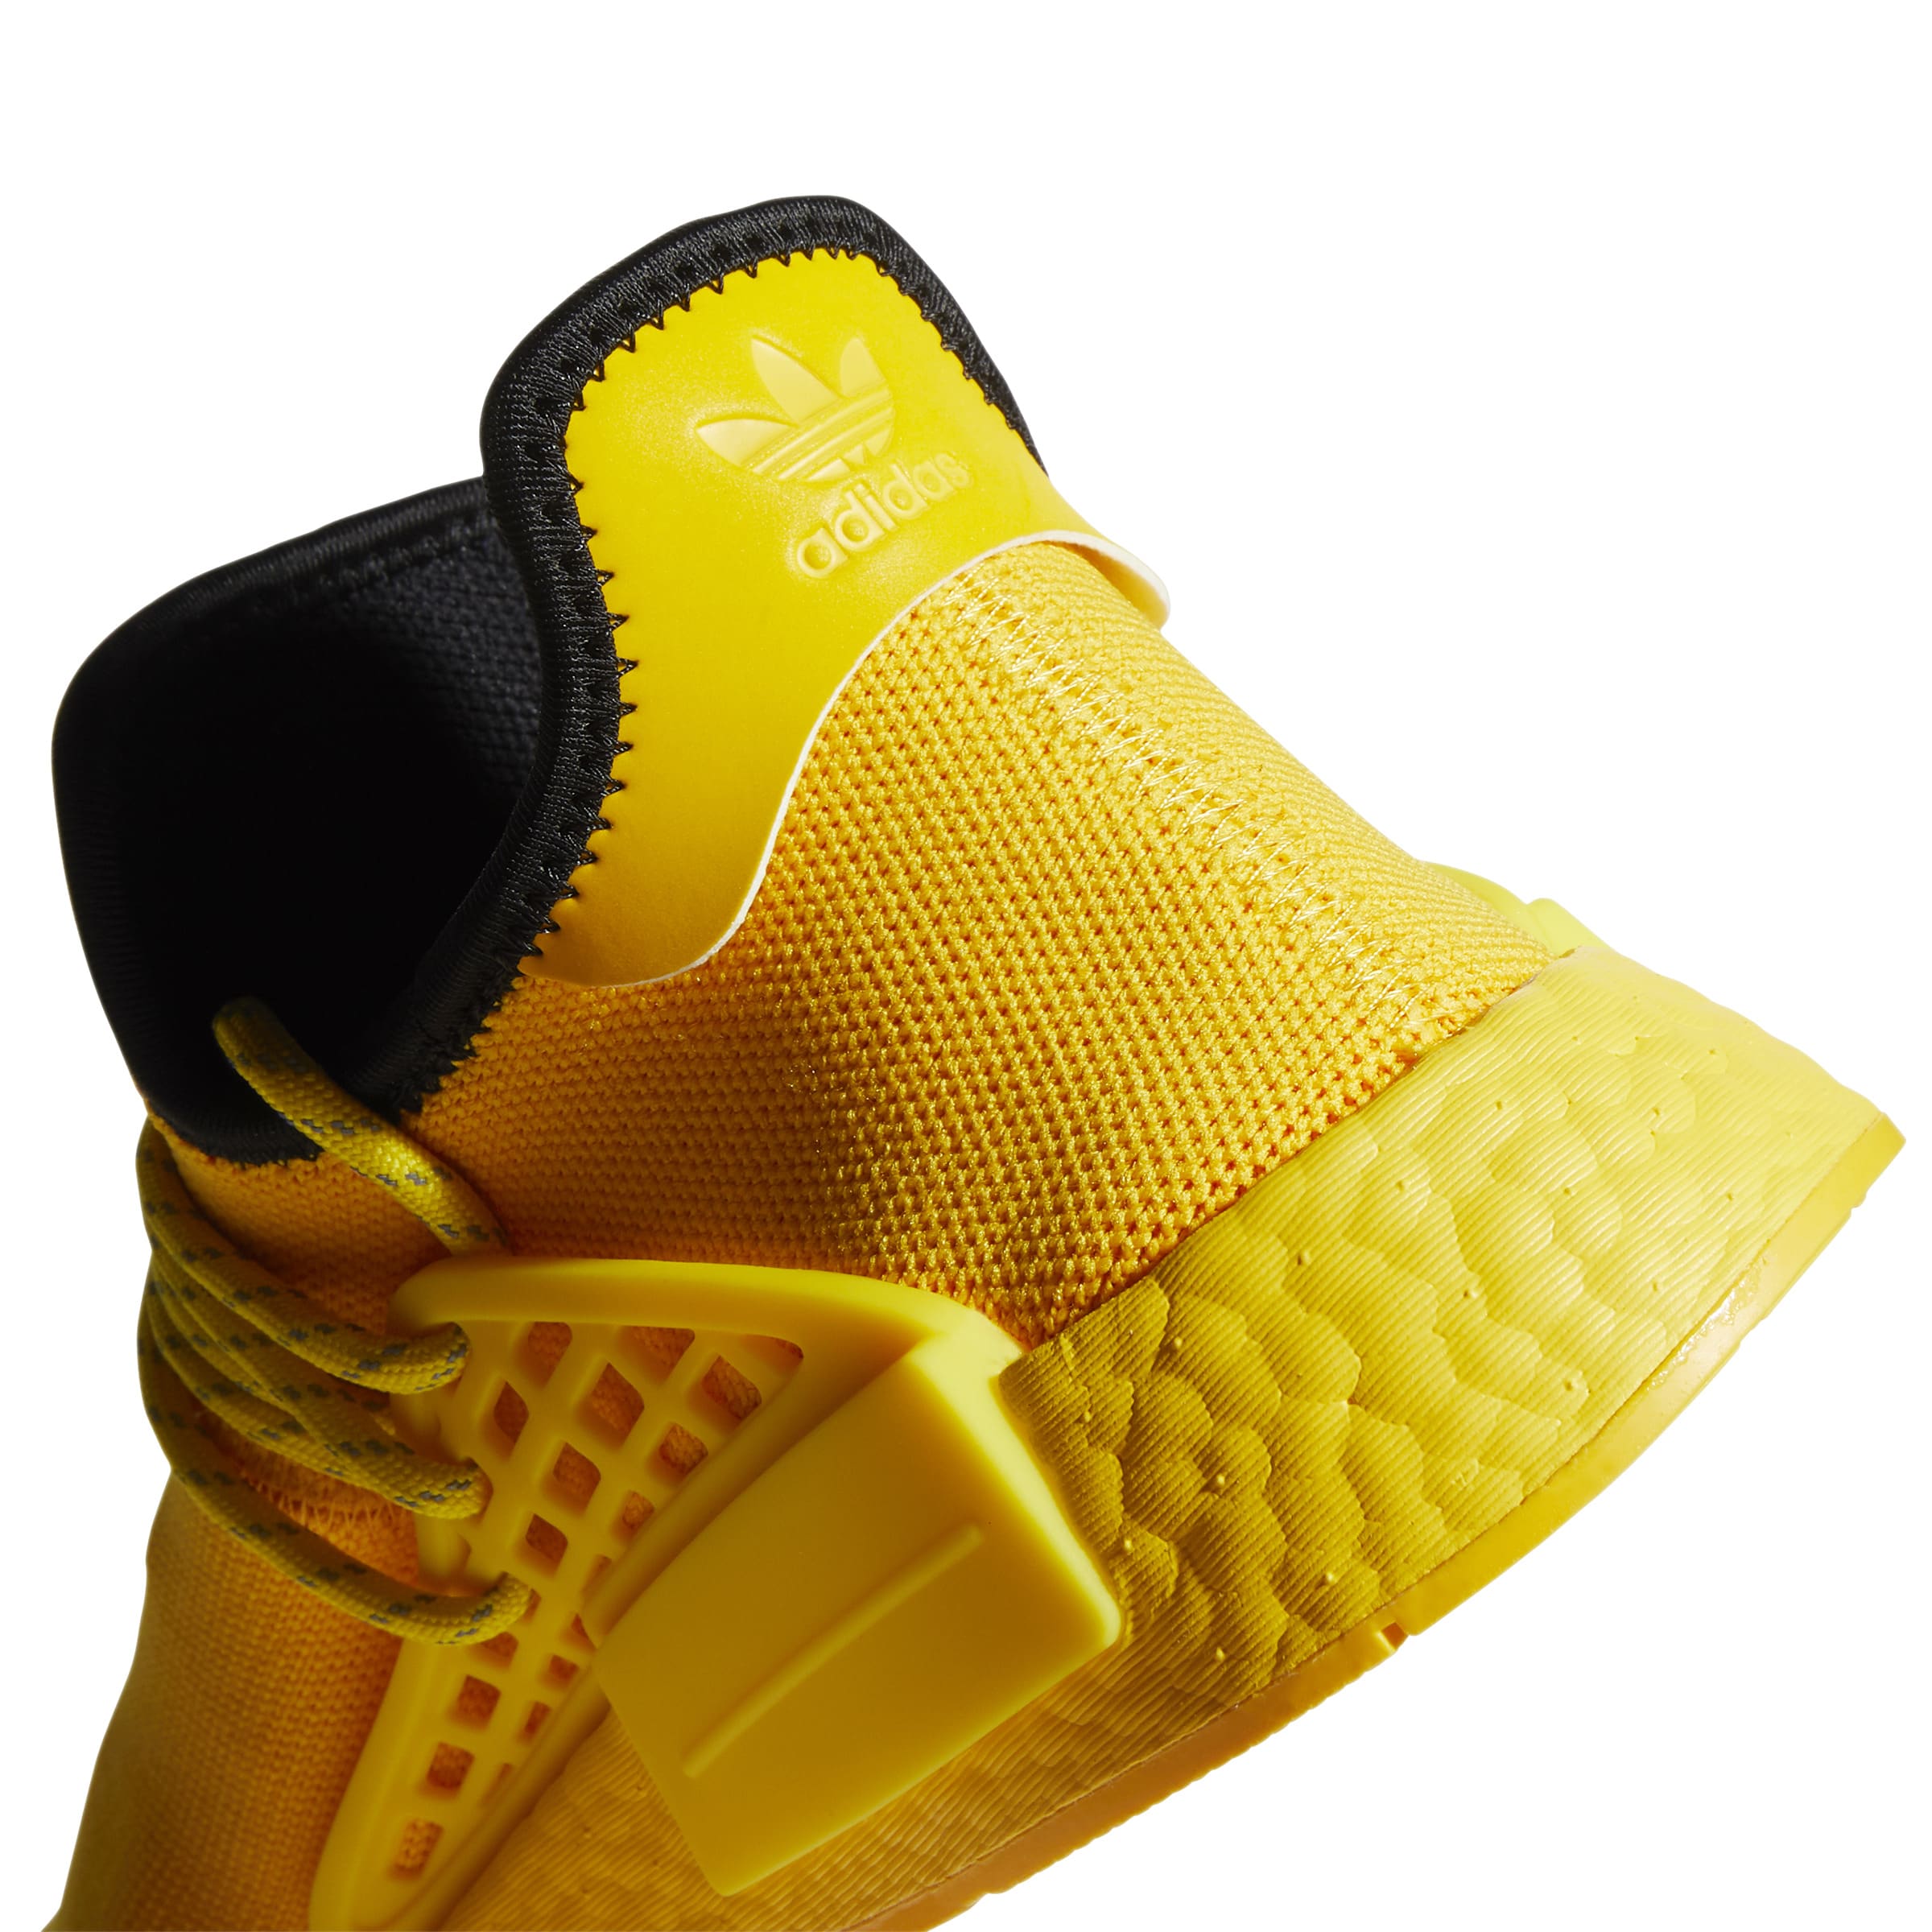 Adidas and Pharrell to Release 'Shock Yellow' Humanrace Sneakers